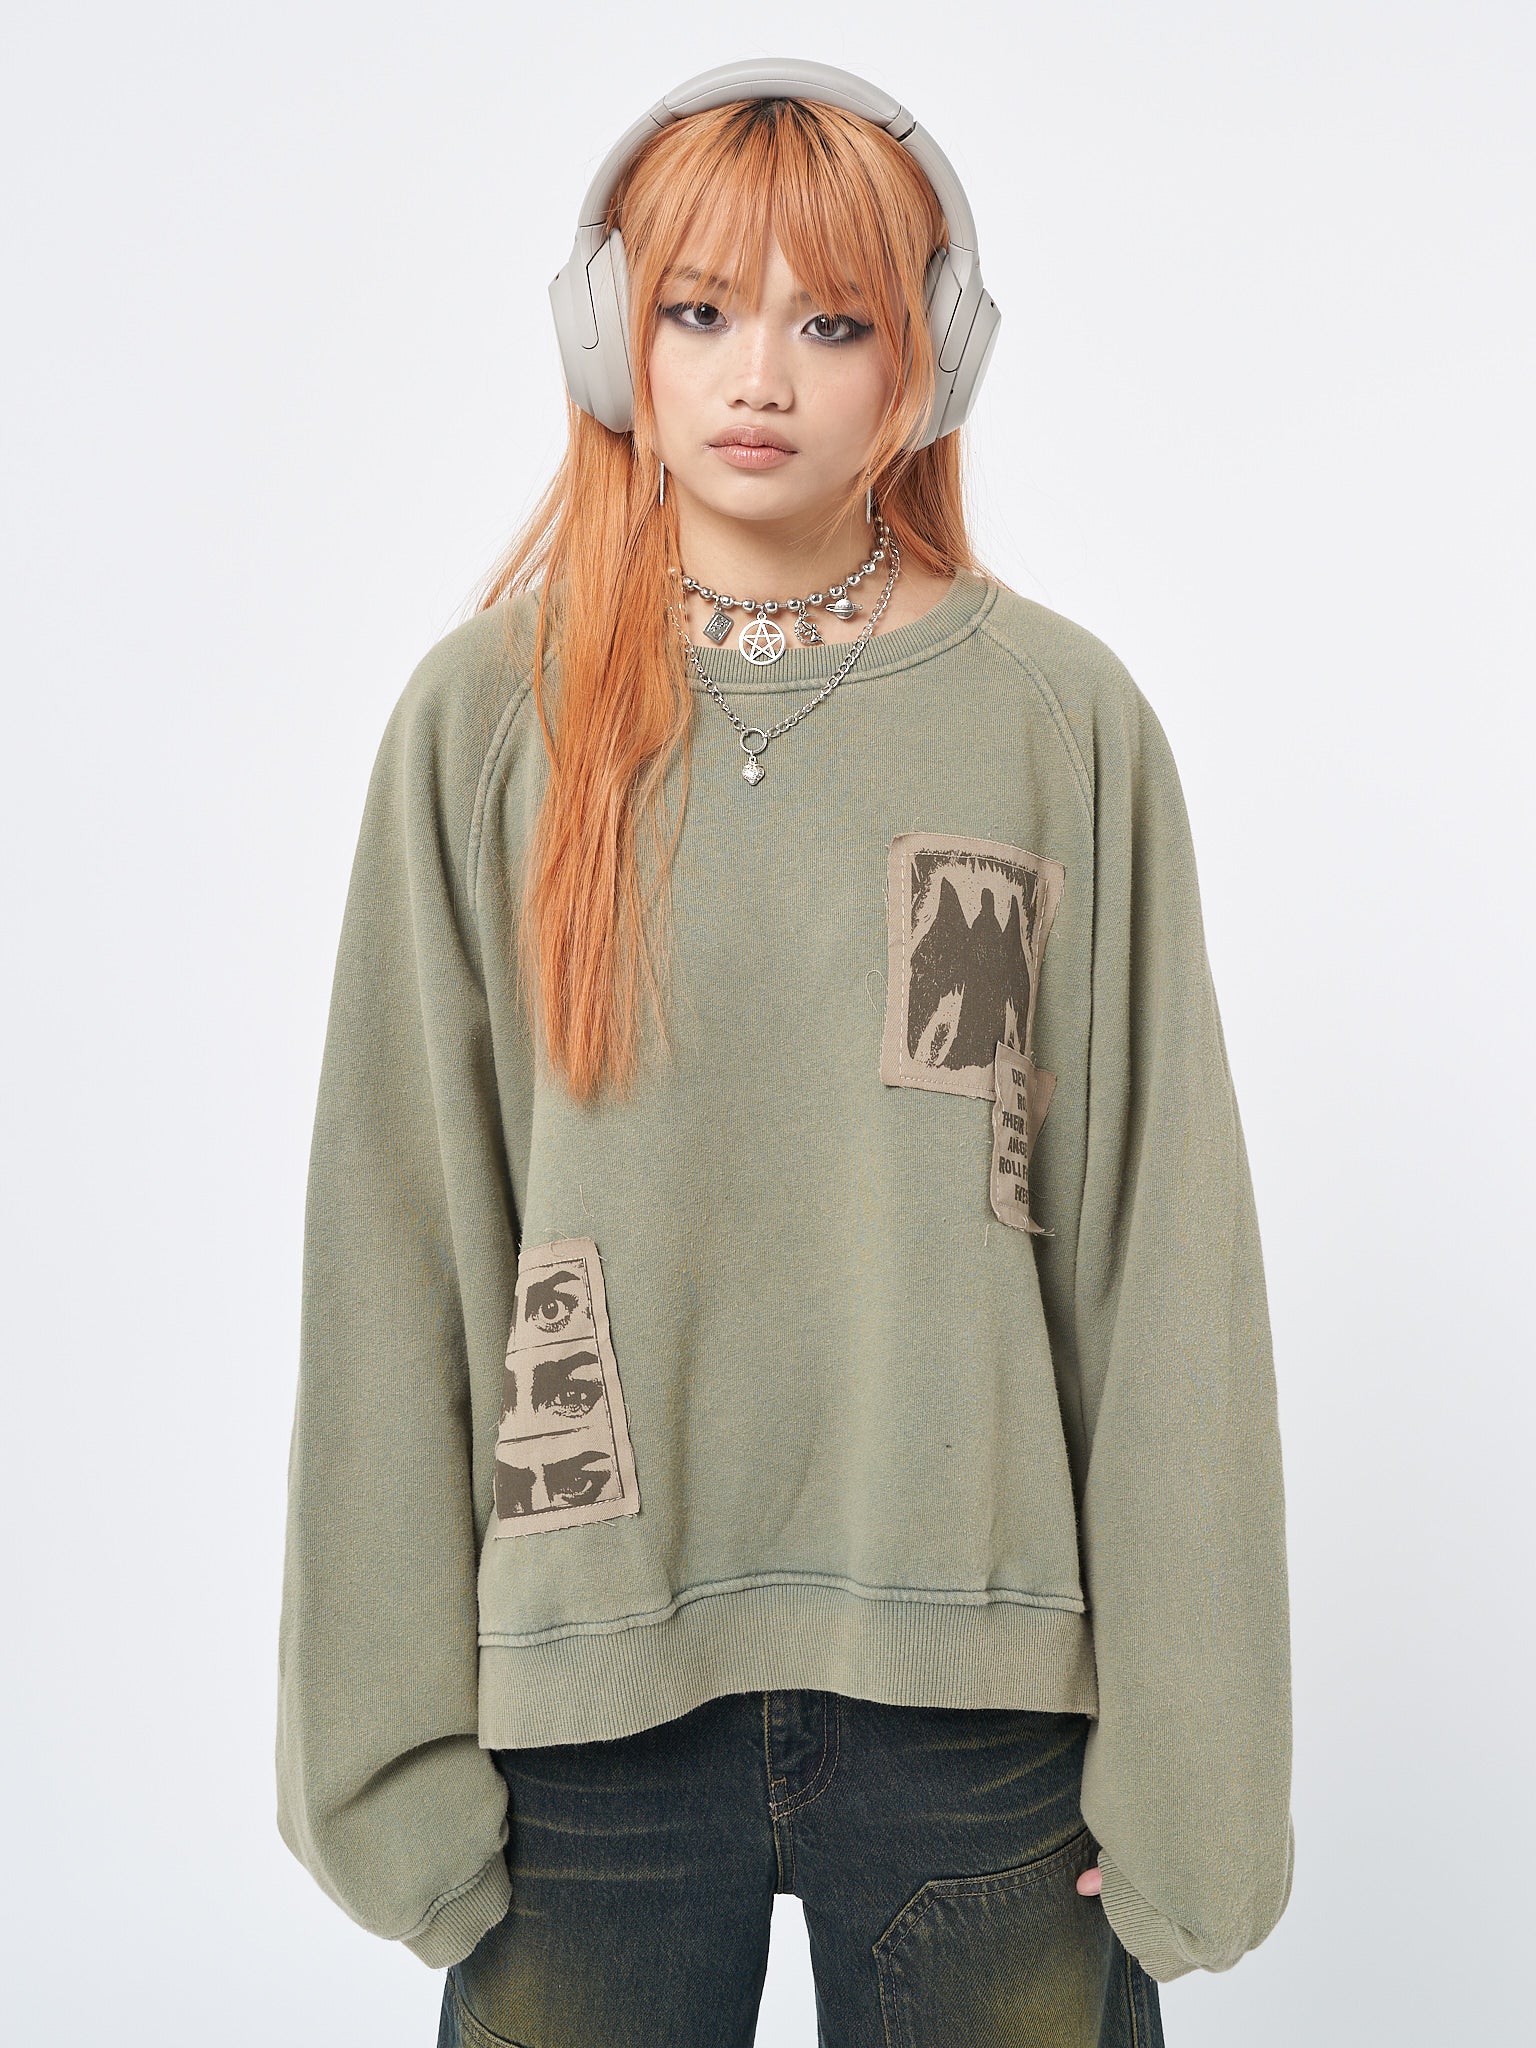 Oversized sweatshirt in smoke green with front patches in beige